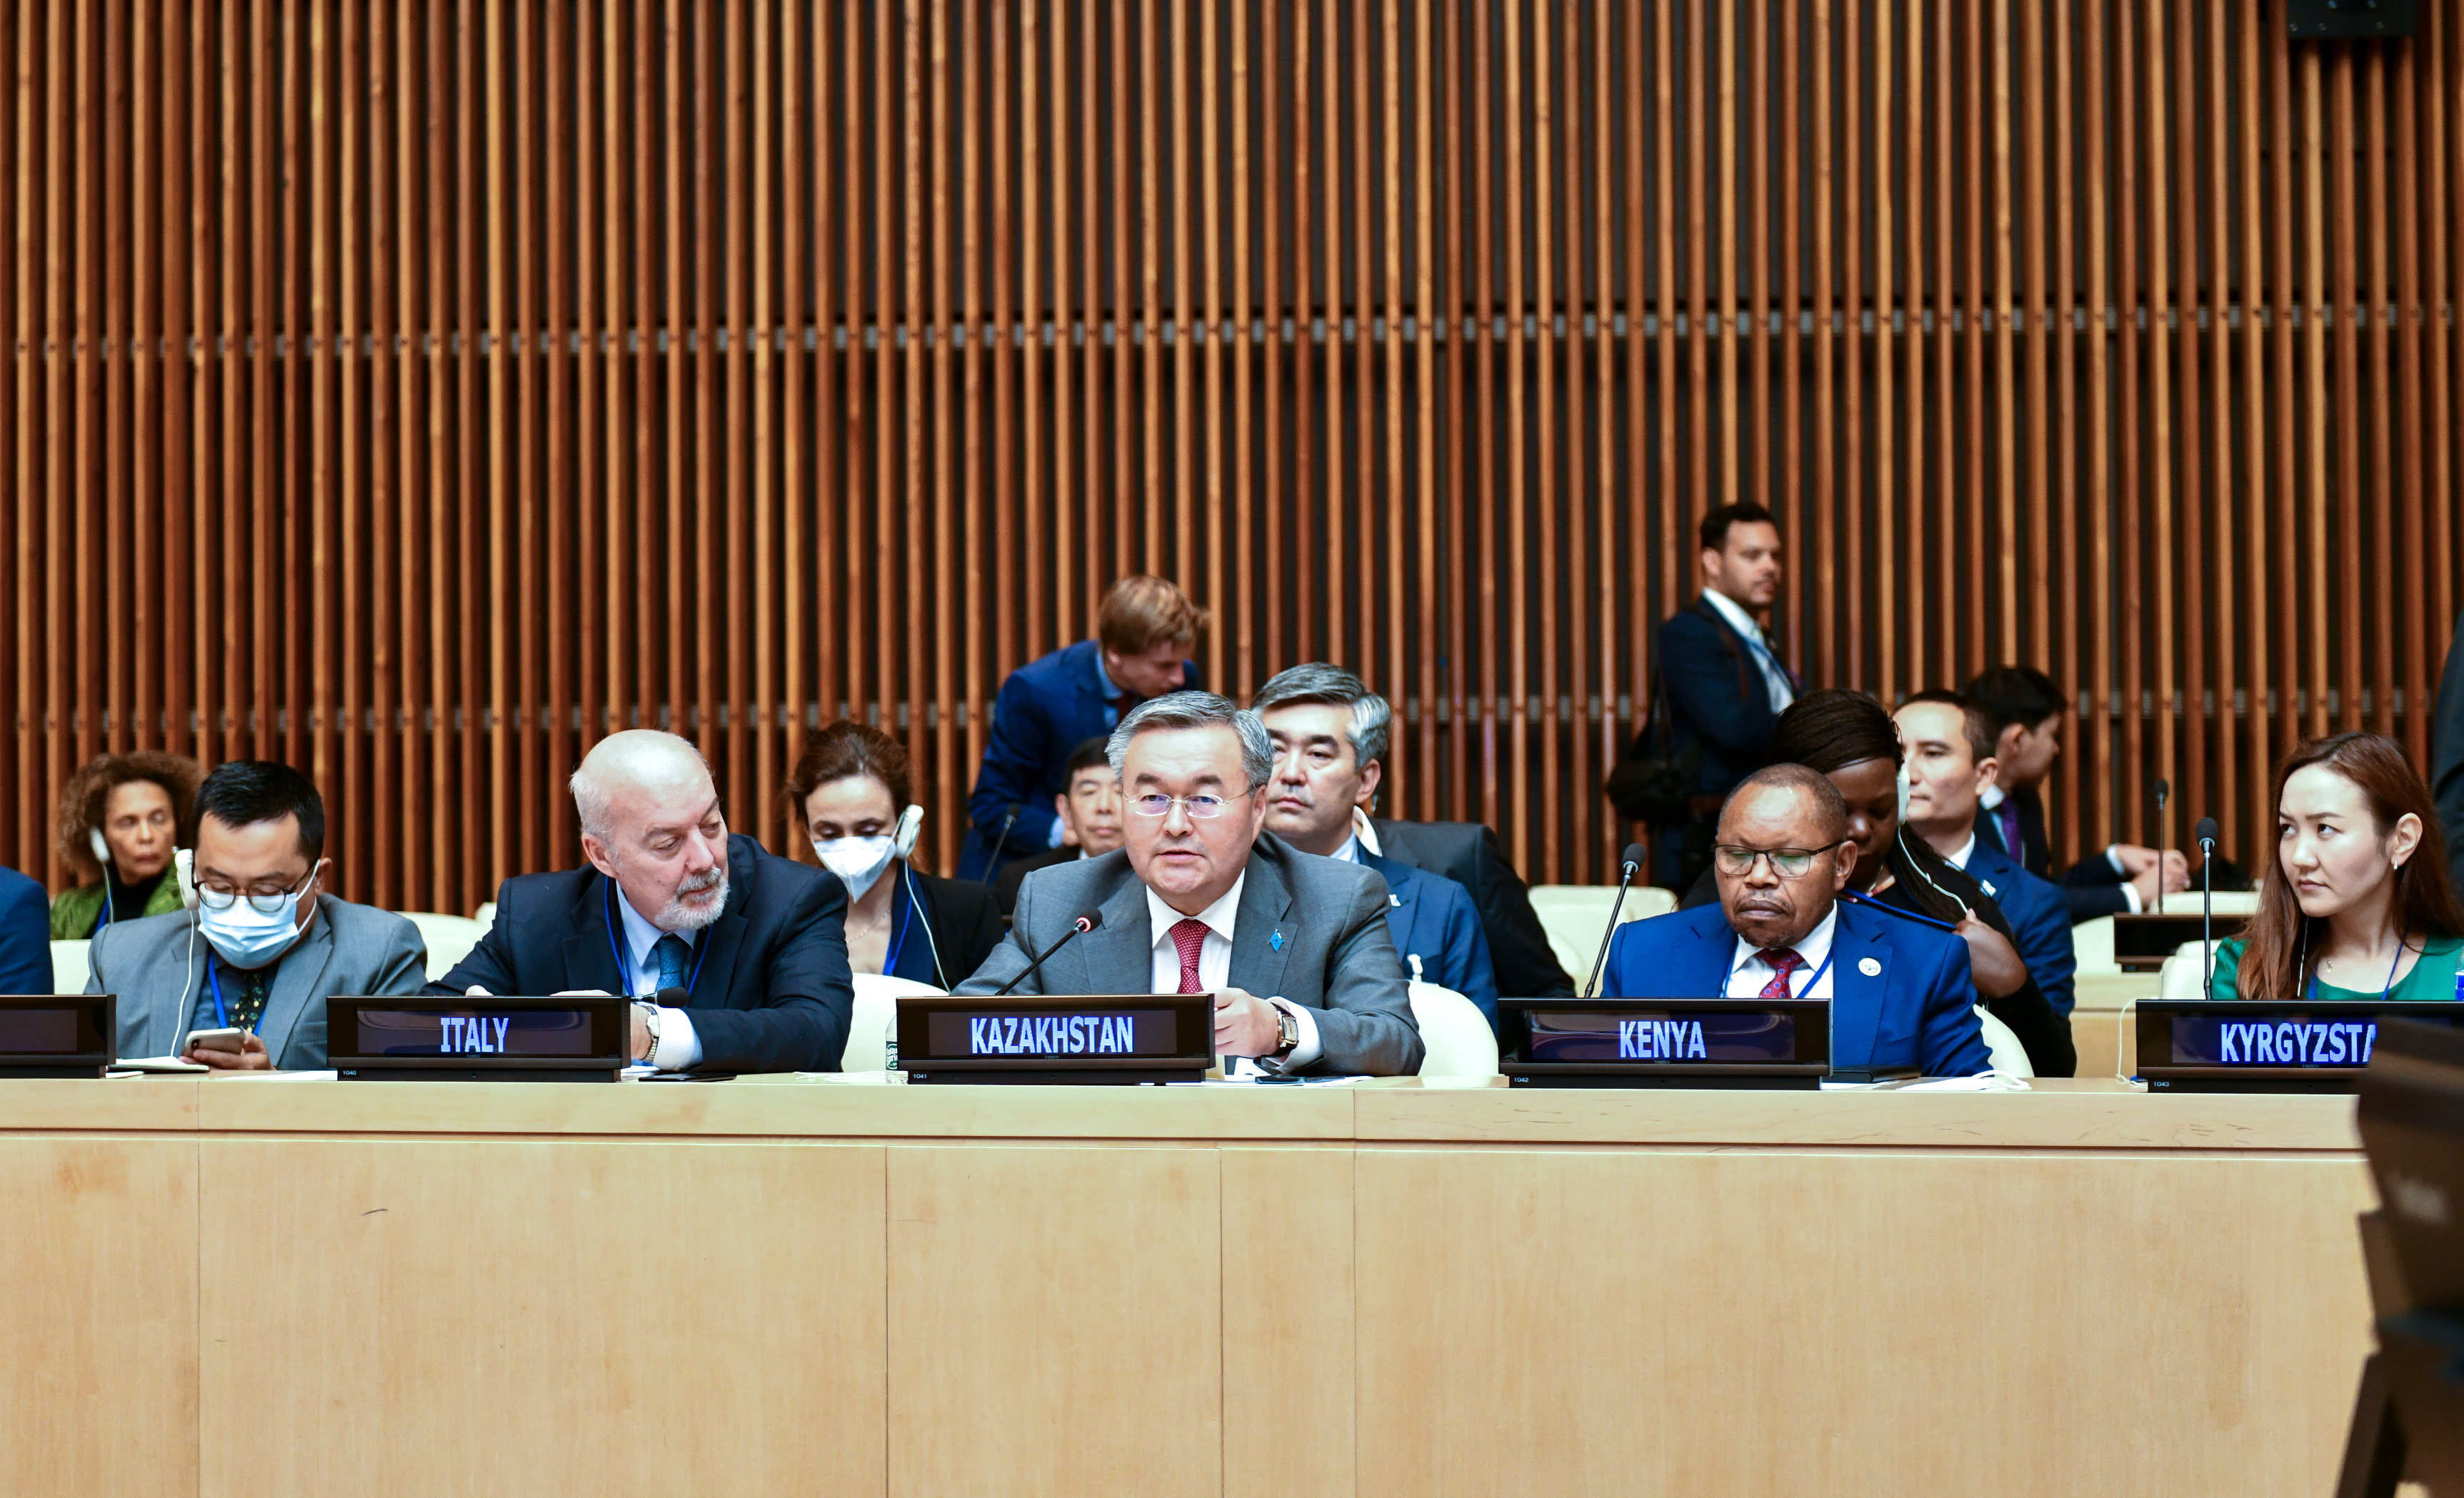 Kazakhstan’s delegation continues its participation in the UN General Assembly